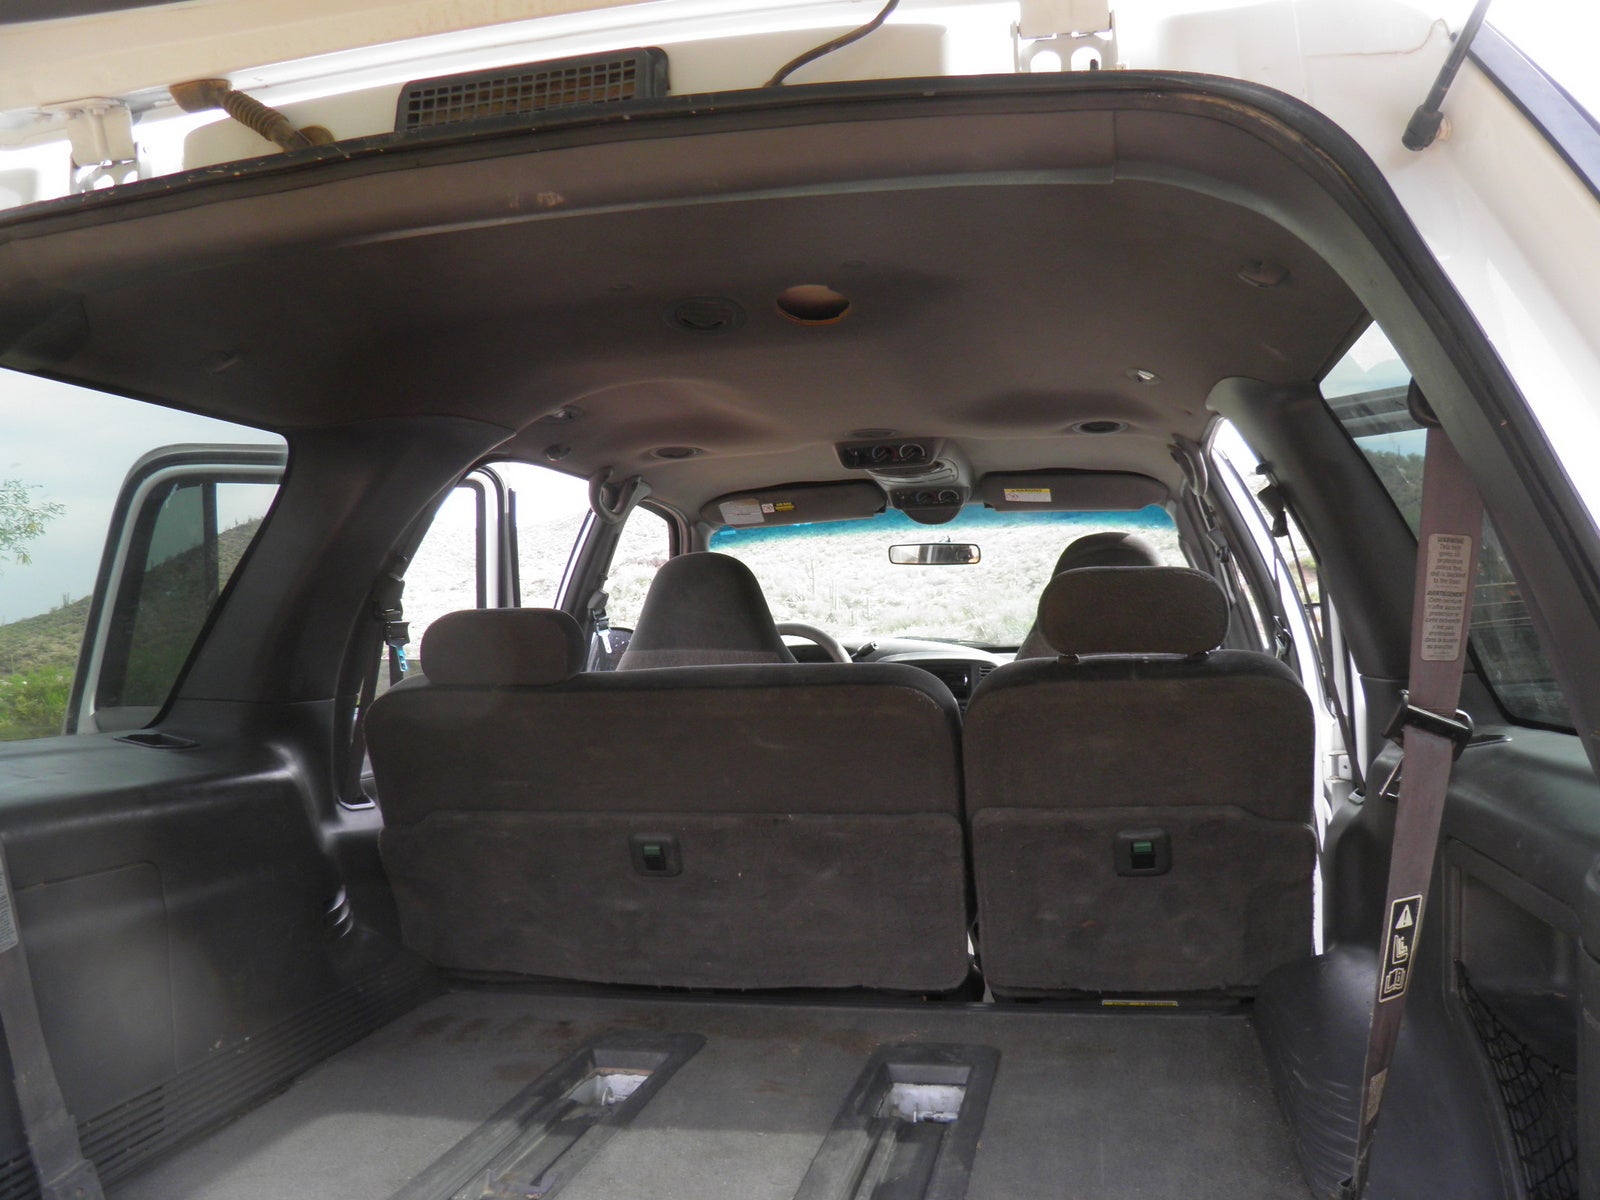 1999 Ford expedition xlt interior #1